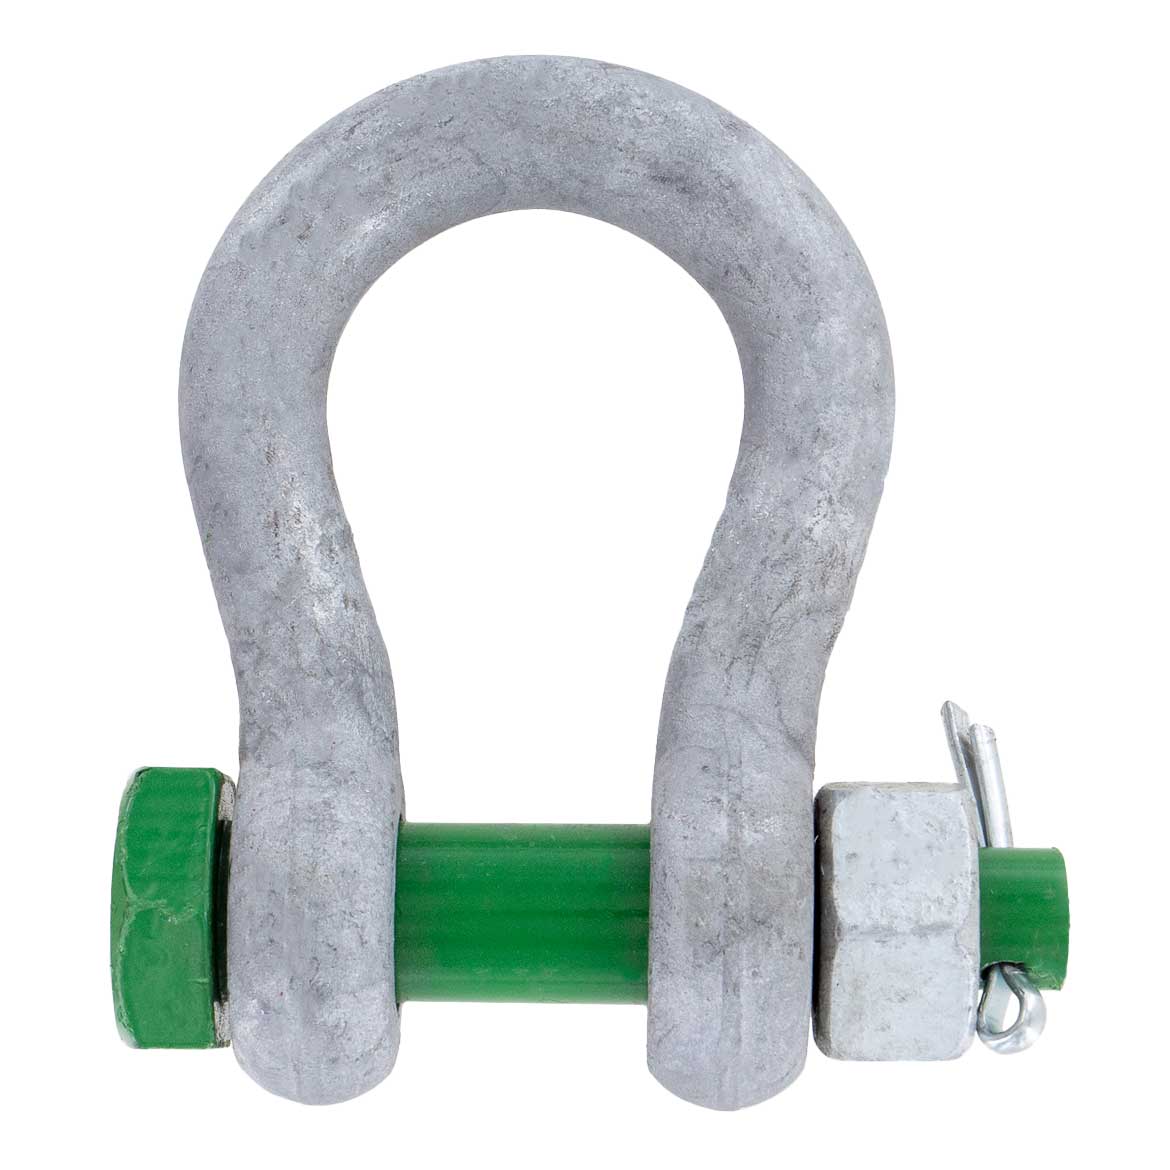 5/8" Van Beest Green Pin® Bolt Type Anchor Shackle | G-4163 - 3.25 Ton primary image